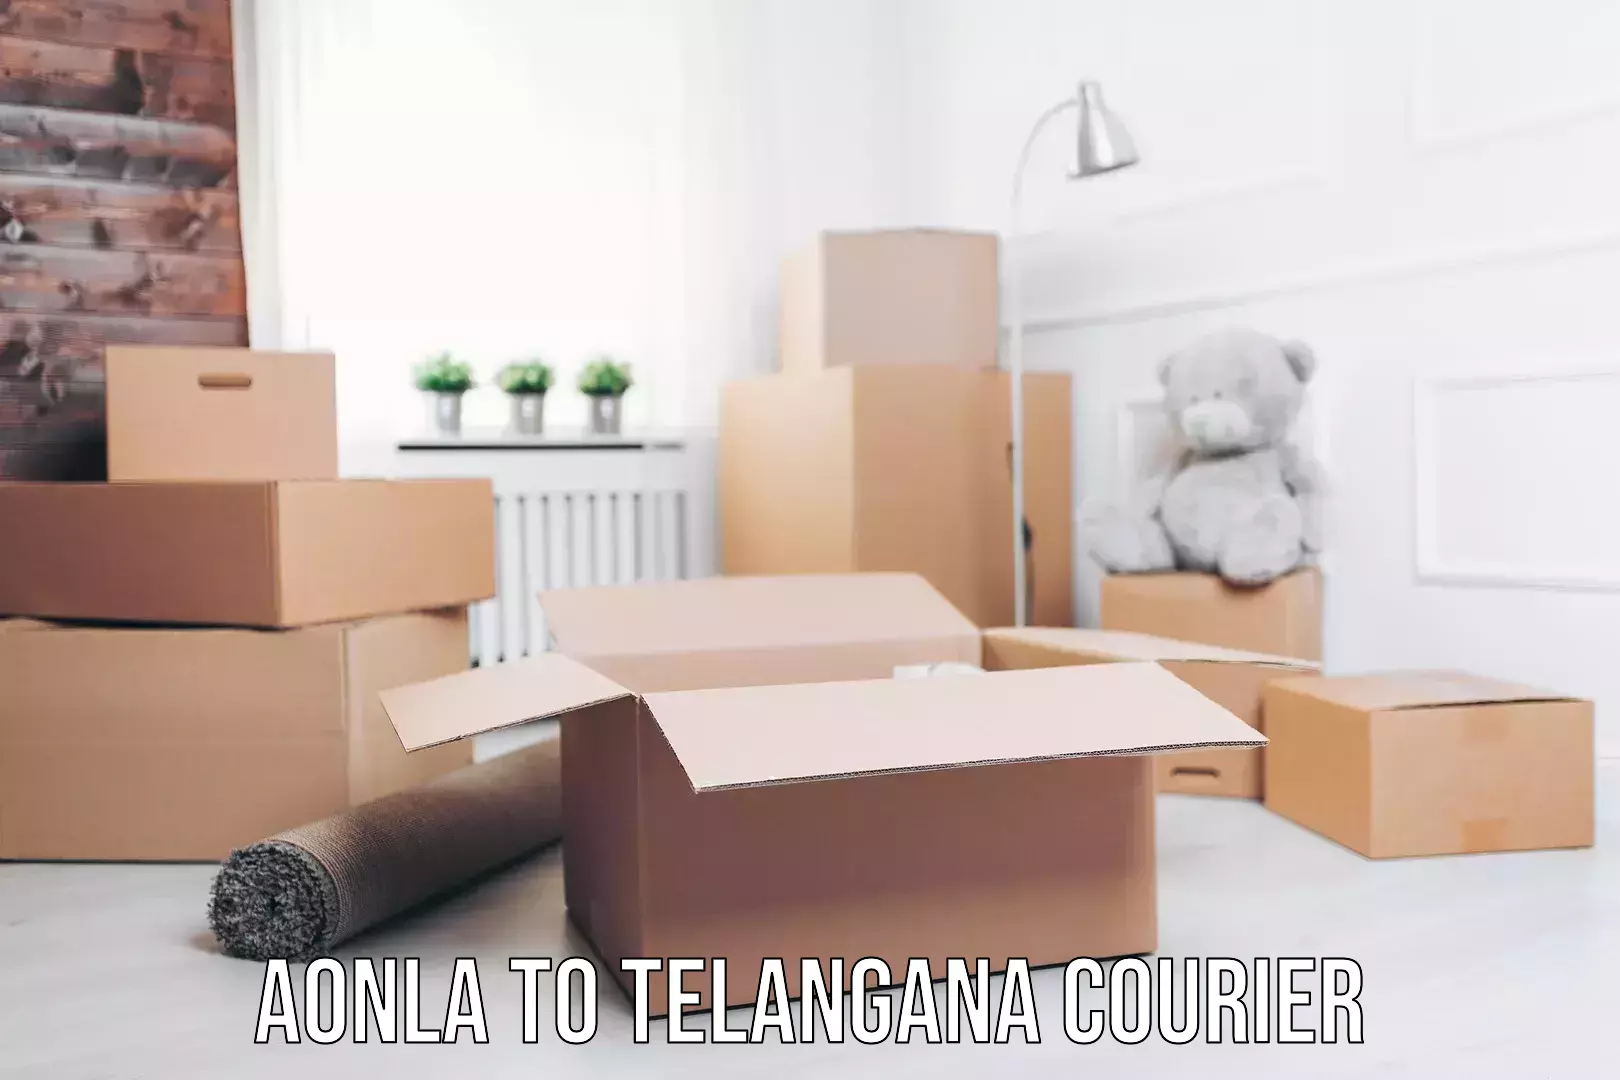 Nationwide parcel services Aonla to Telangana